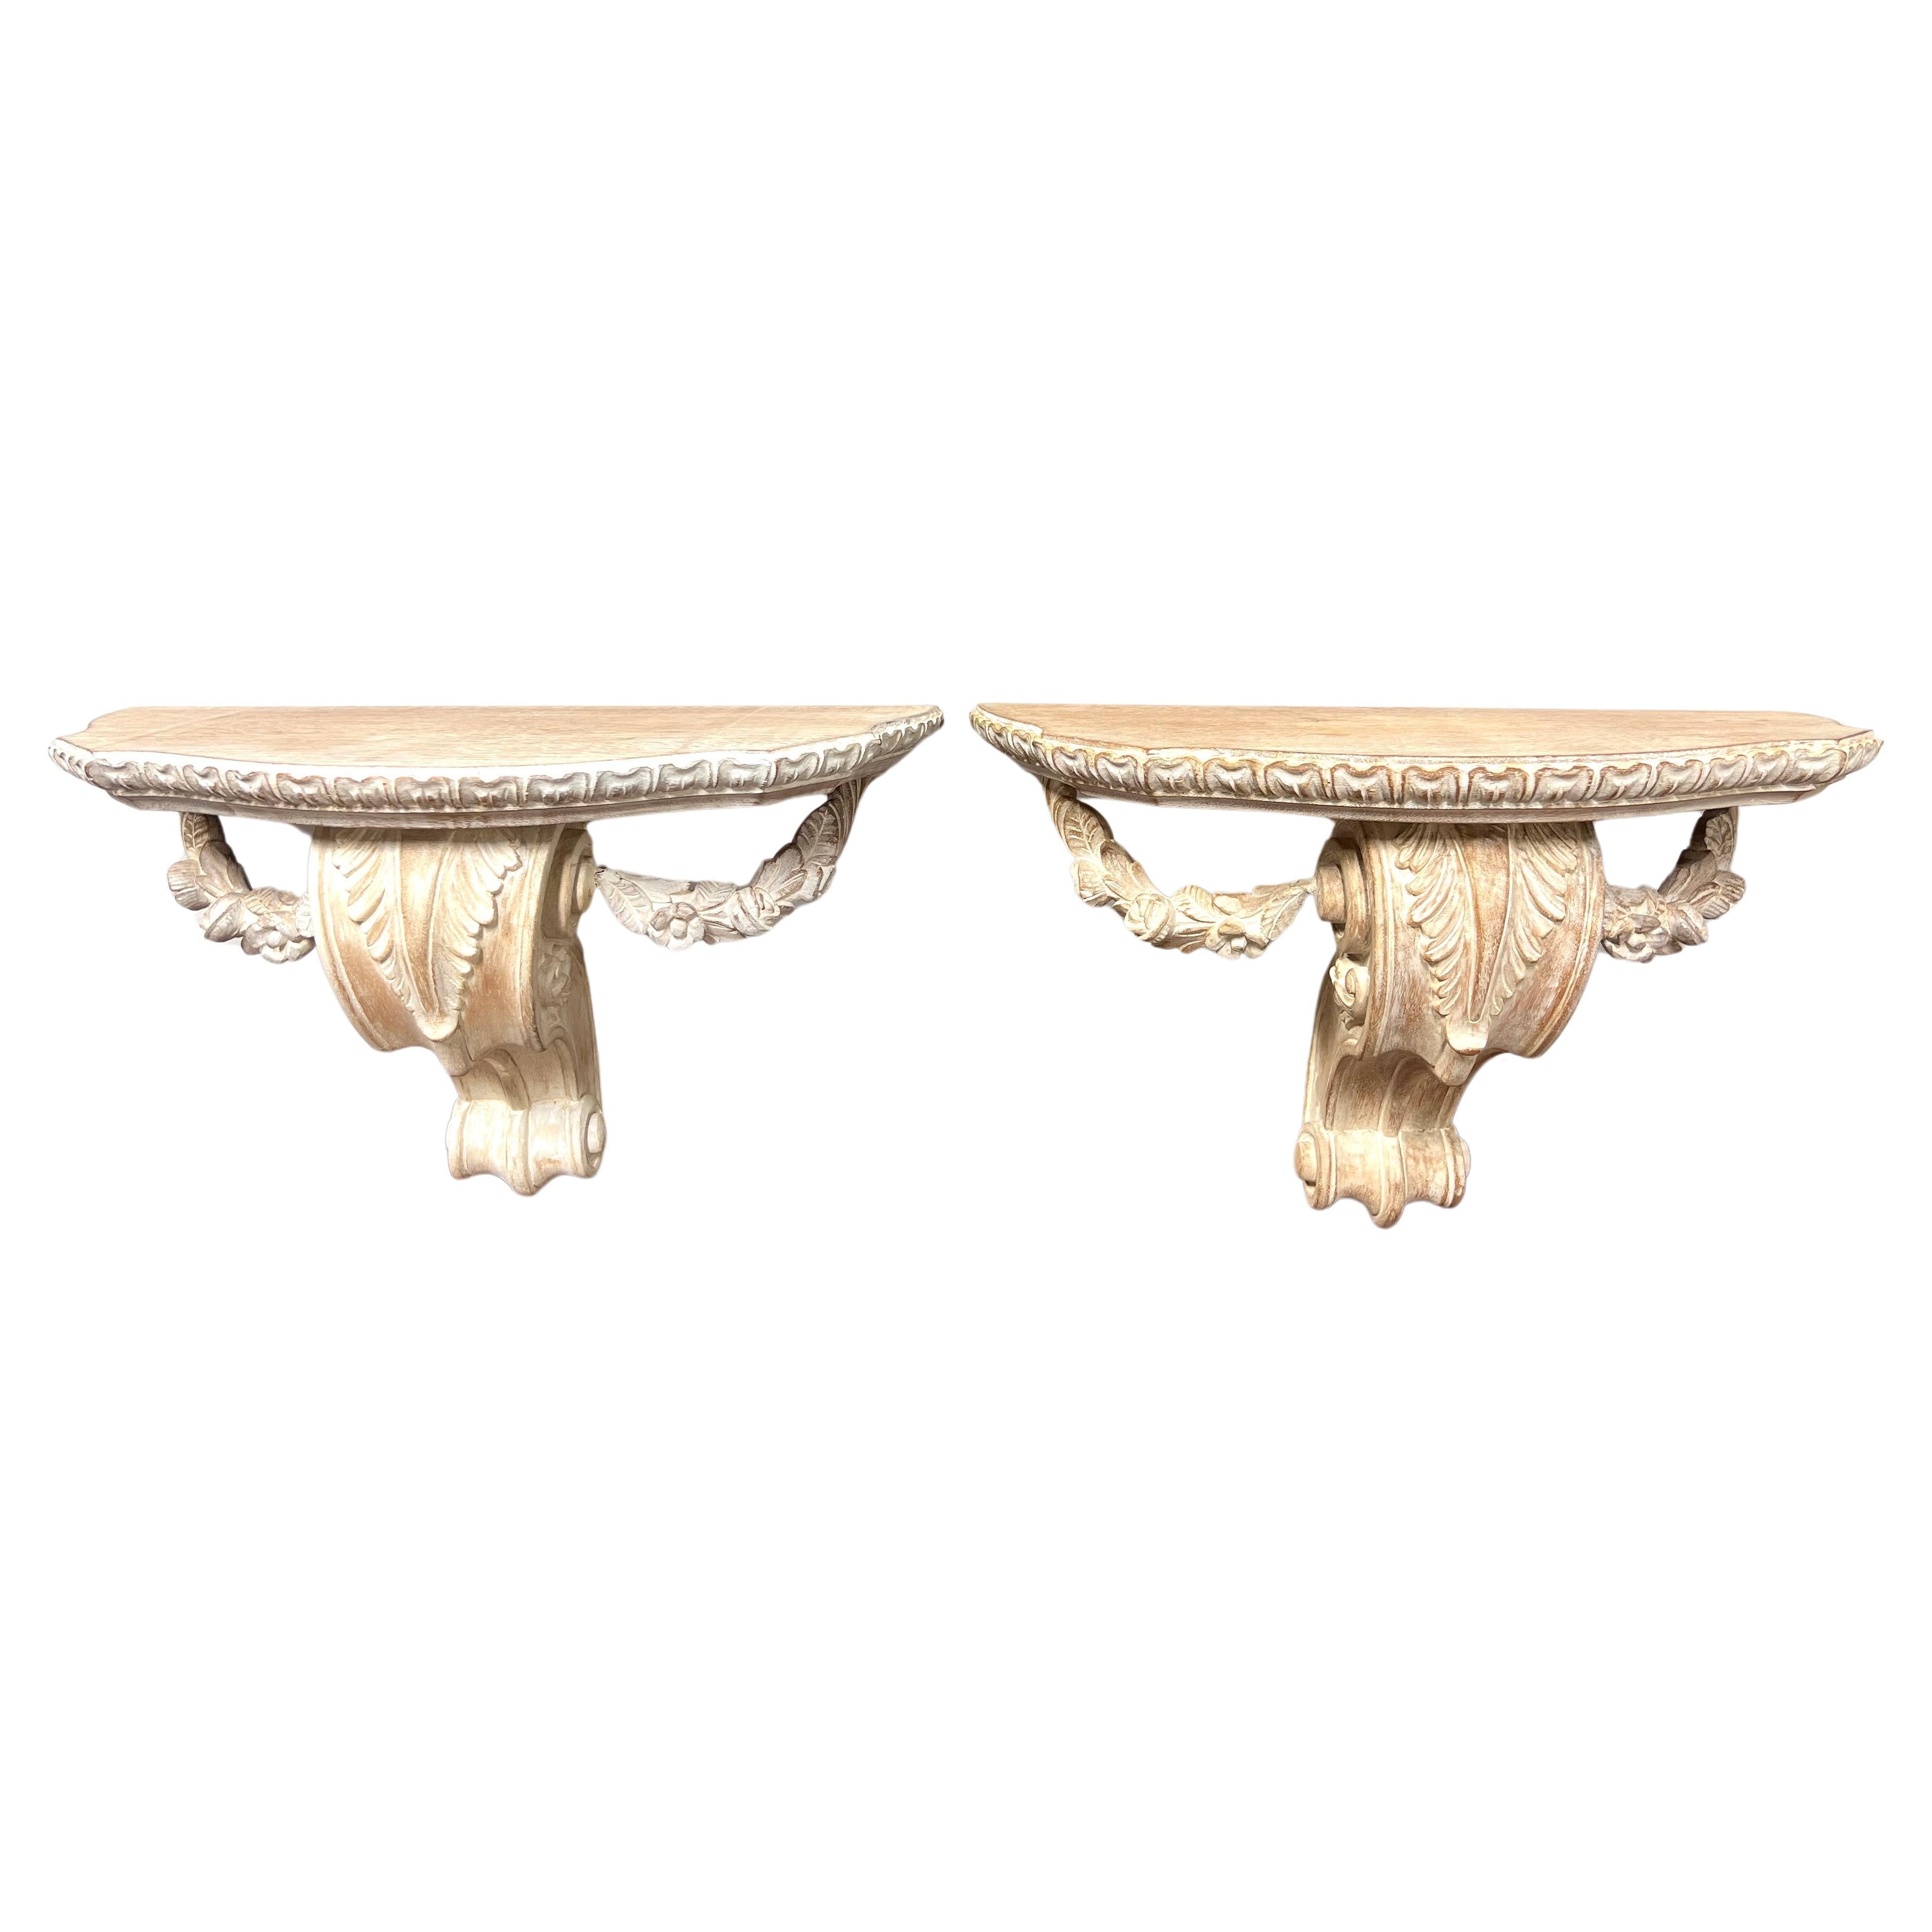 1980's Carved Whitewashed Wood Wall Bracket Shelves - Pair